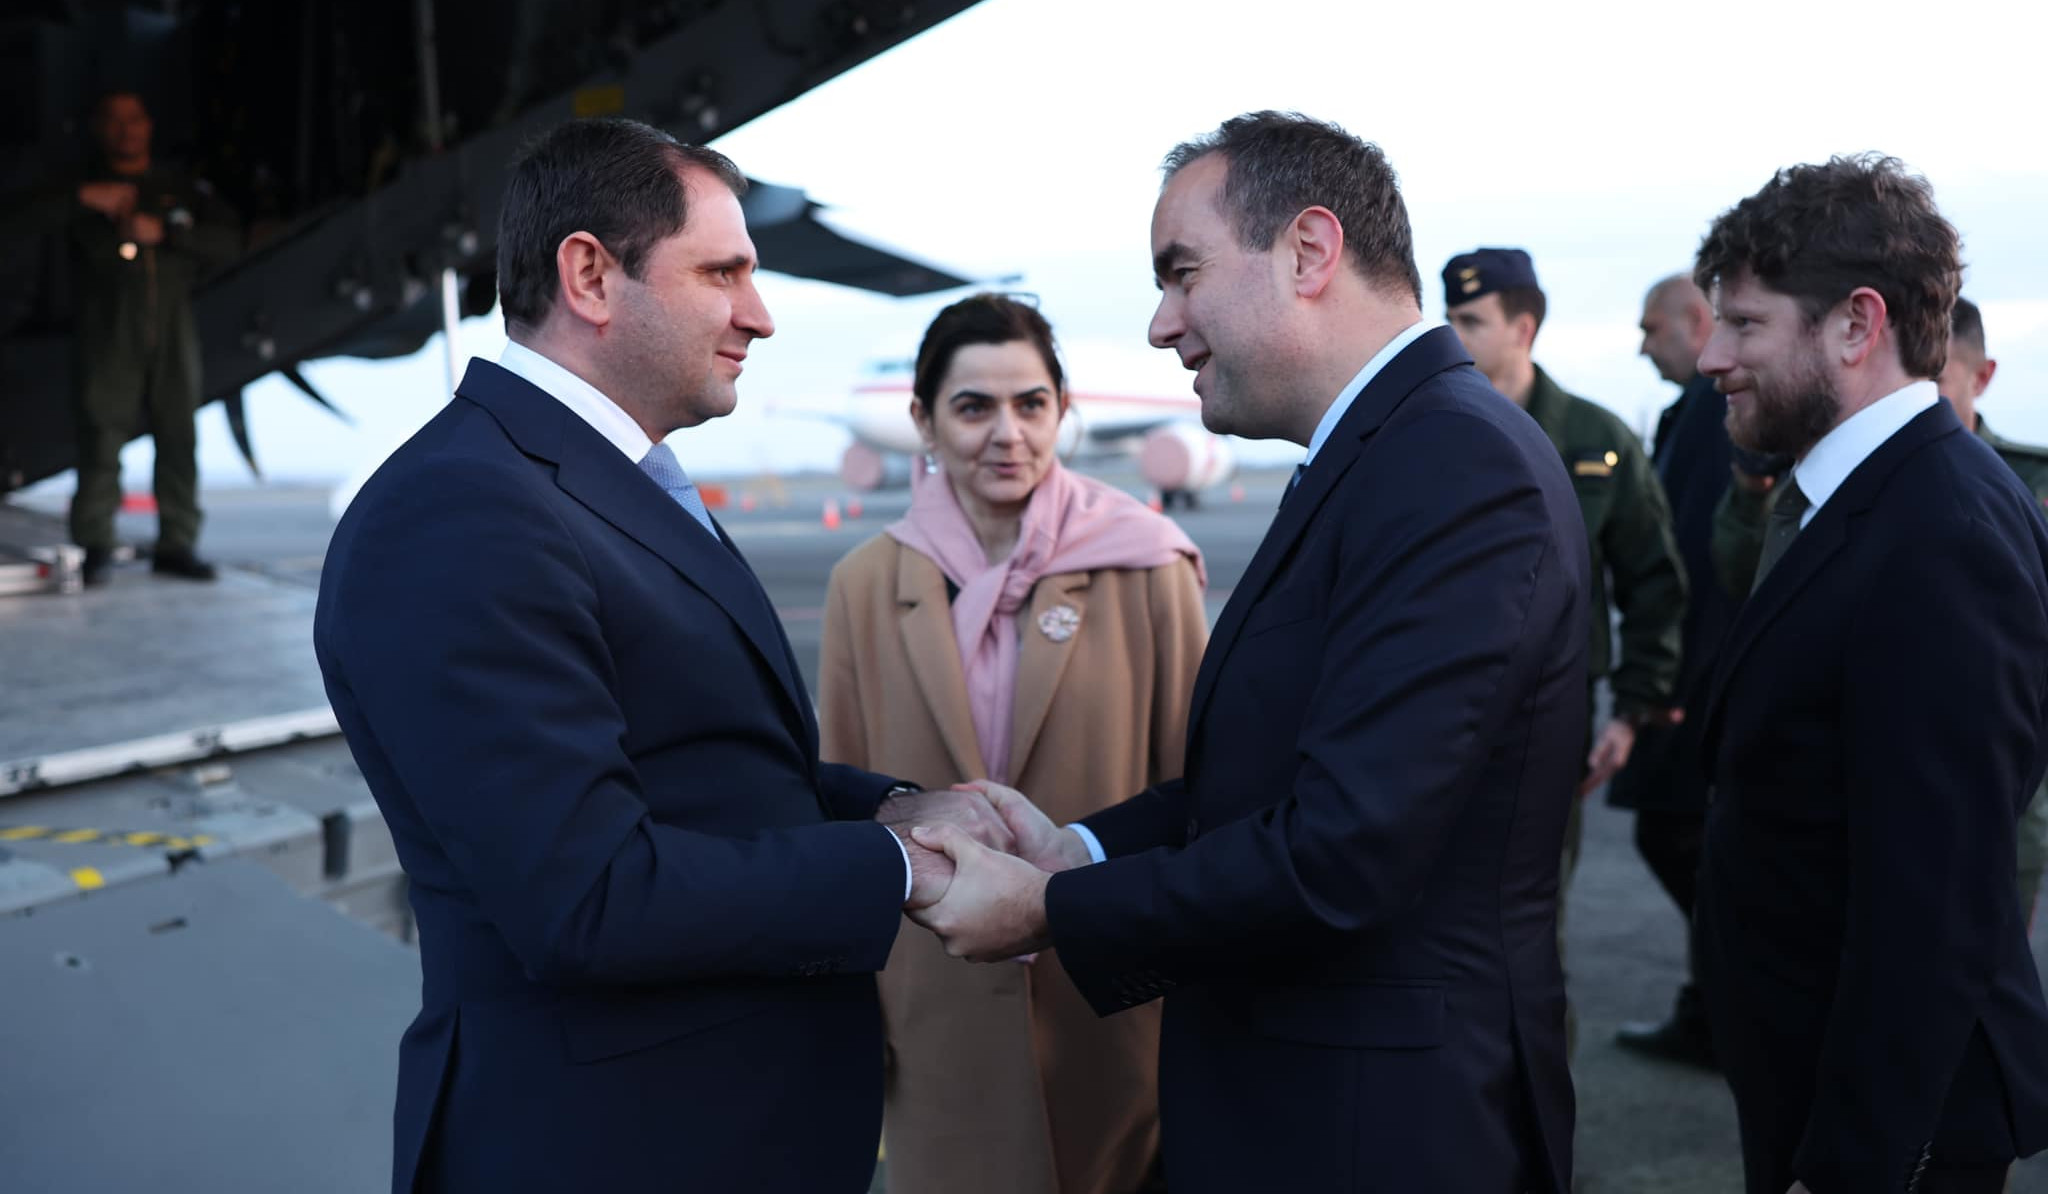 Official visit of Minister of French Armed Forces ended